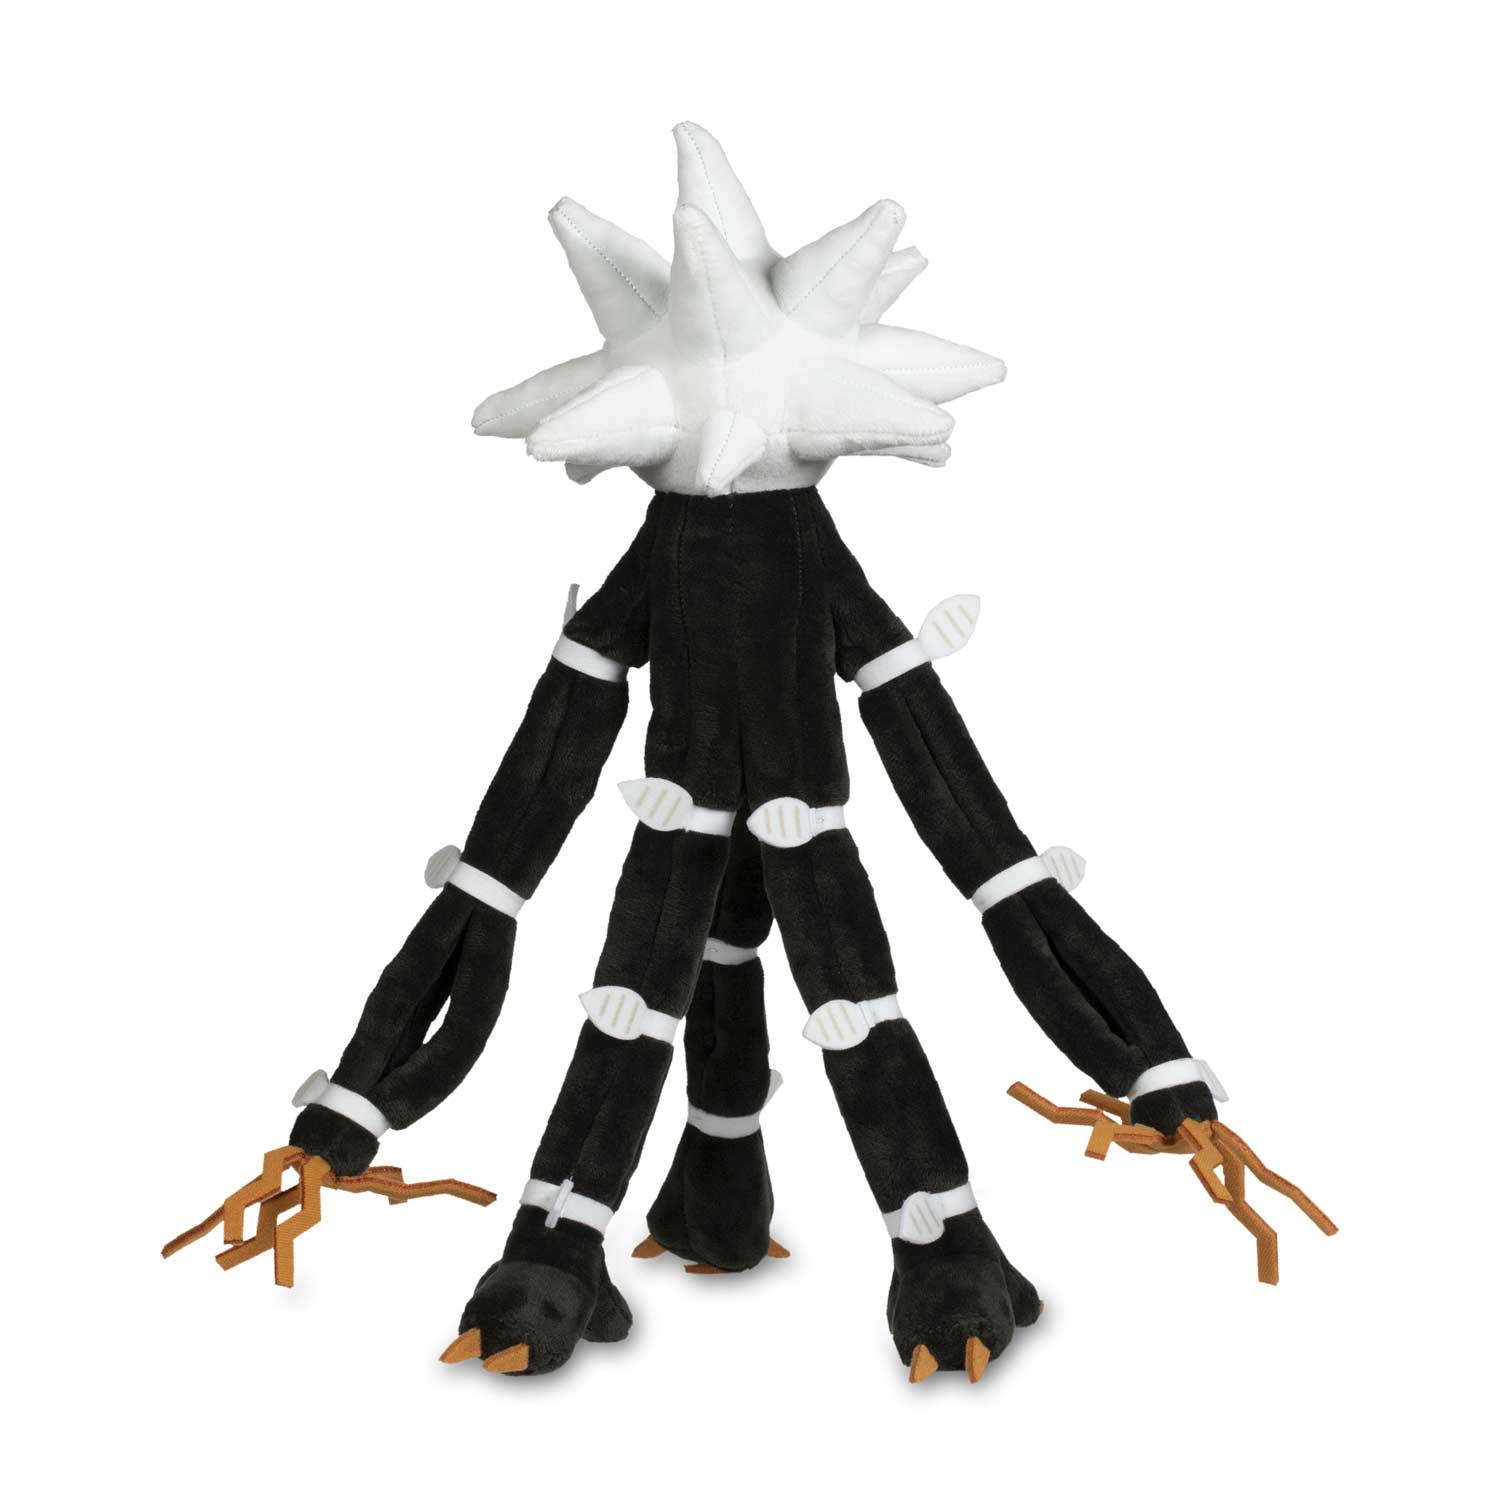 Will You Get Any of The Alolan Ultra Beast Plushies? 